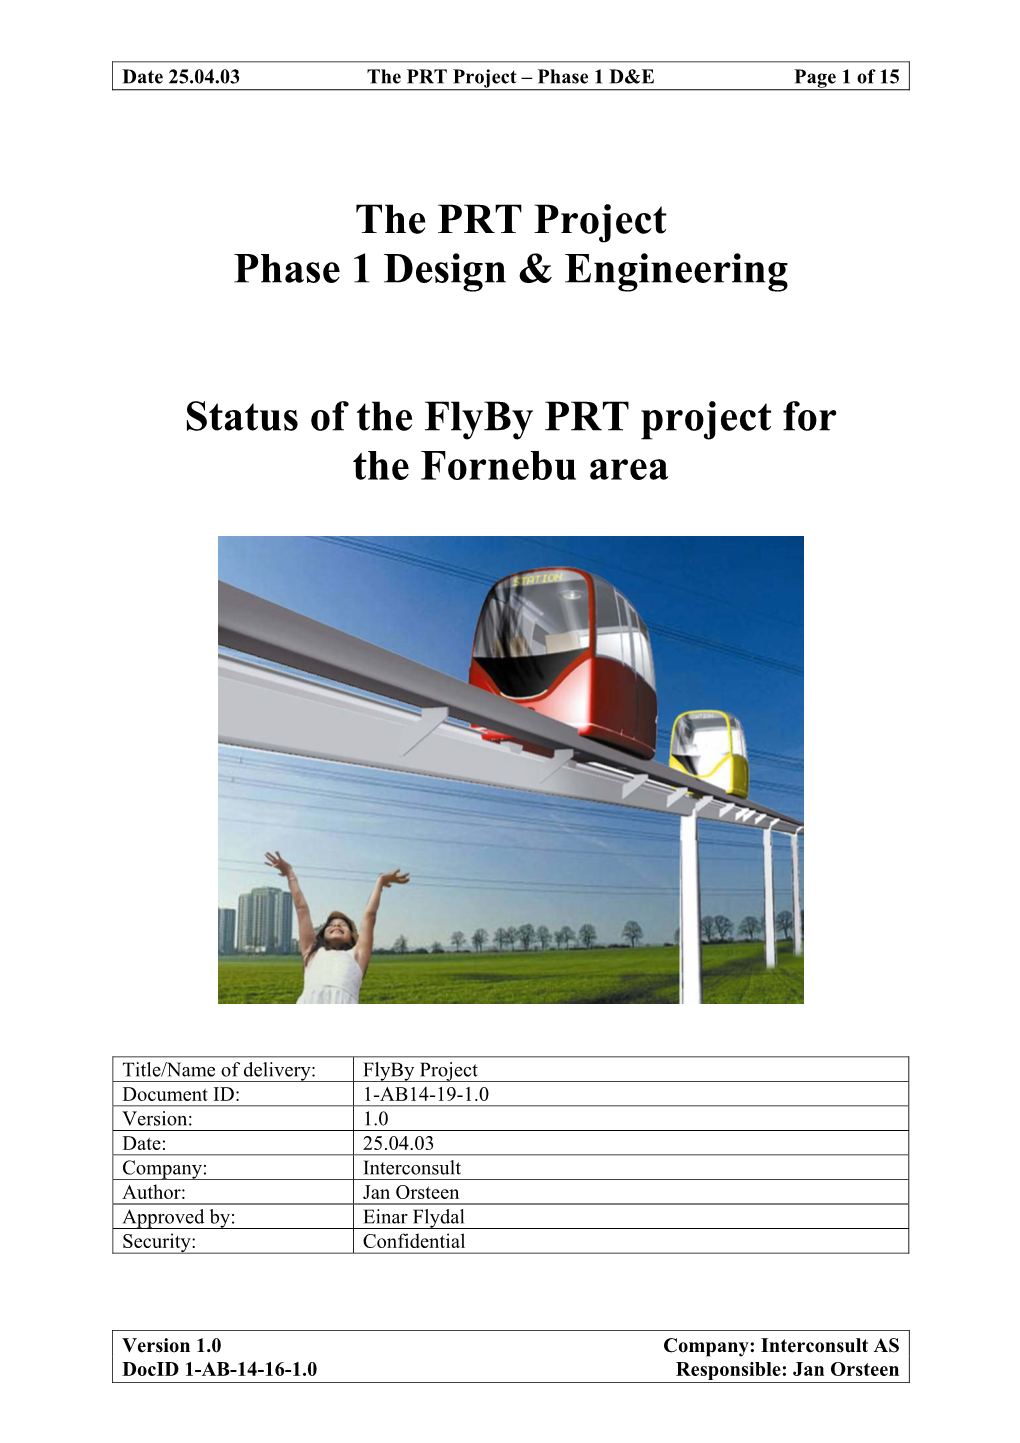 The PRT Project Phase 1 Design & Engineering Status of the Flyby